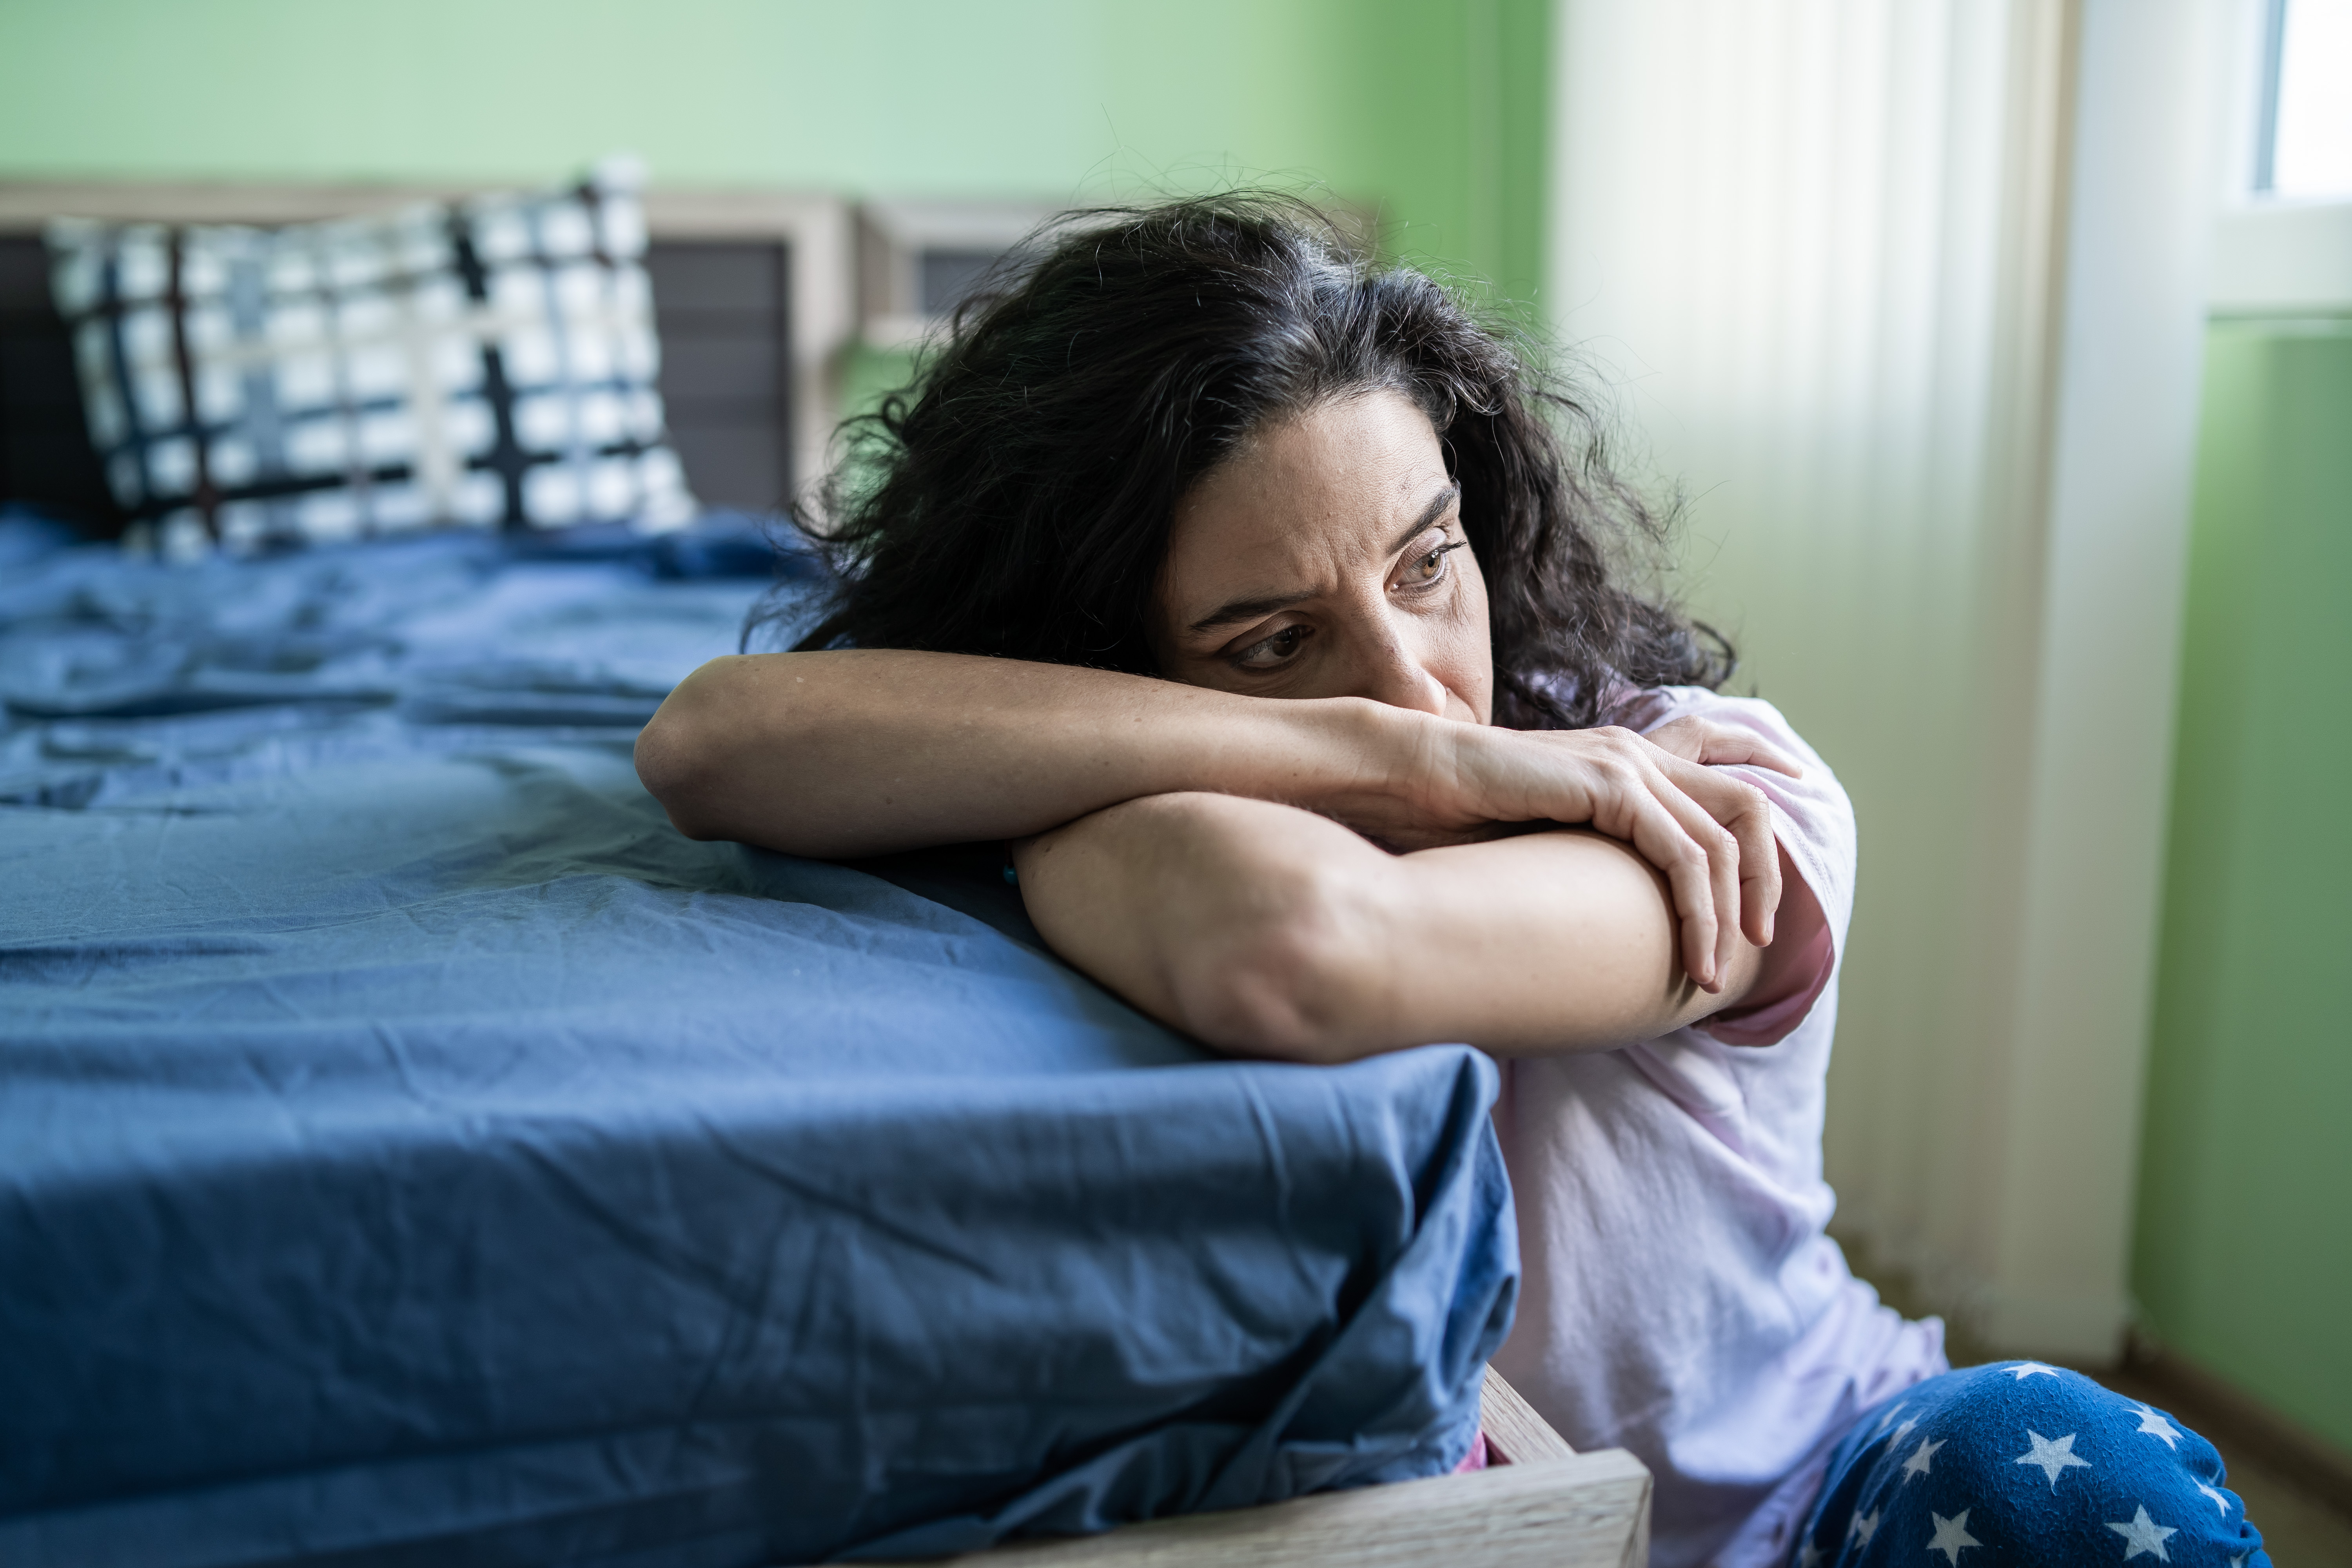 Worried woman sitting on floor next to bed | Source: Getty Images